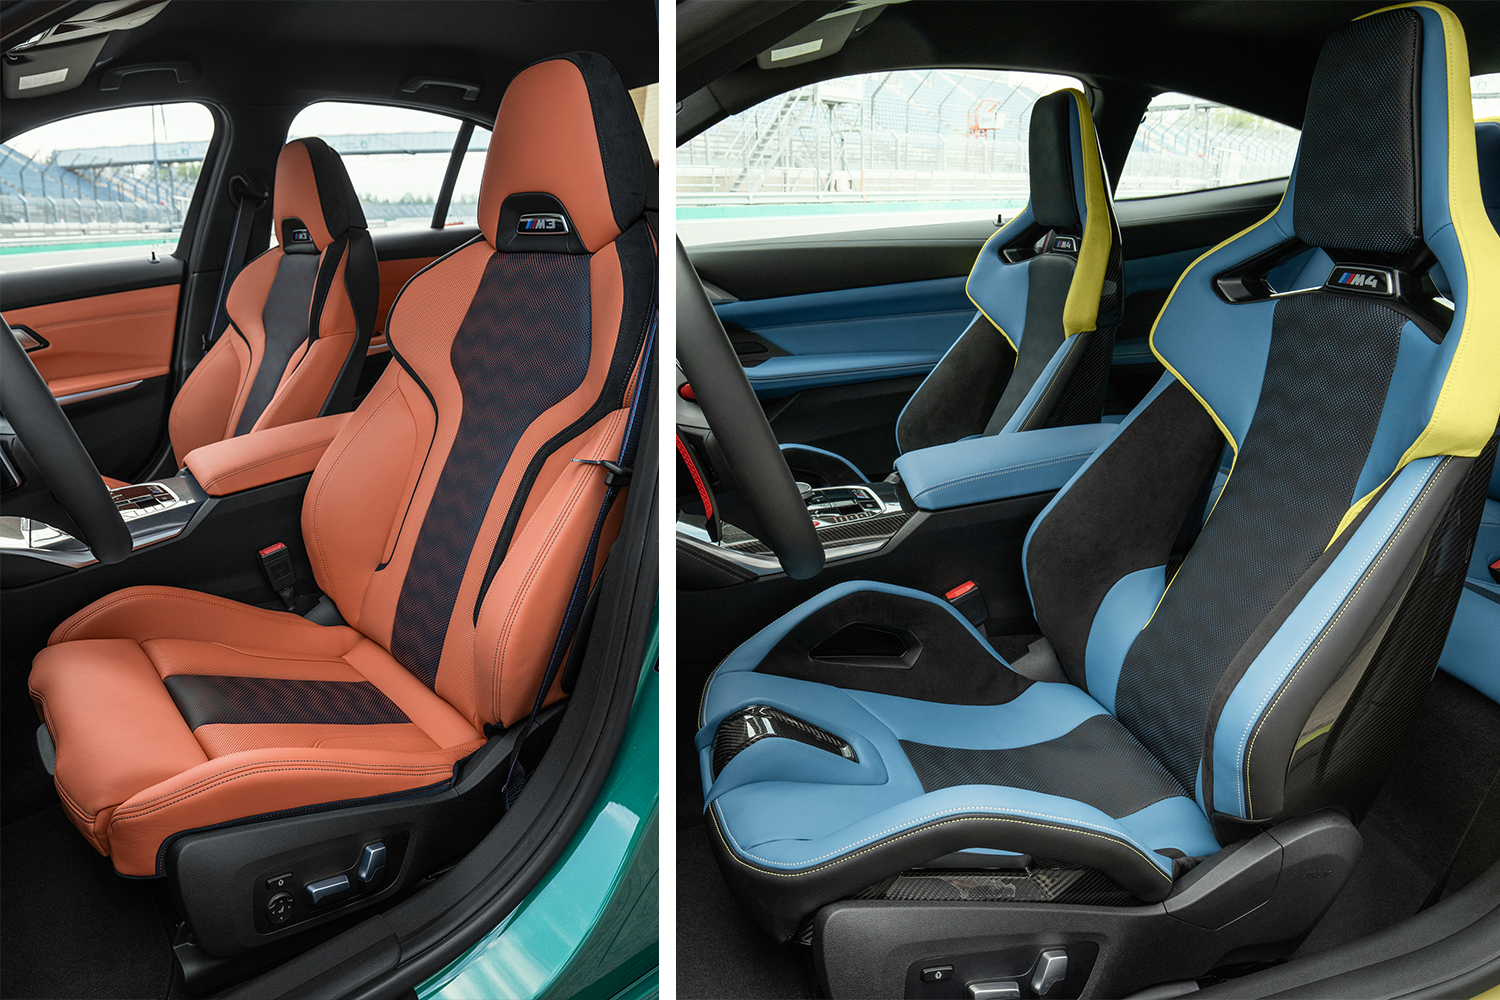 The front seats in the new 2021 BMW M3 Competition Sedan (left) next to the front seats in the new 2021 BMW M4 Competition Coupe (right), those on the right featuring a carbon fiber horn in between the driver's and passenger's legs